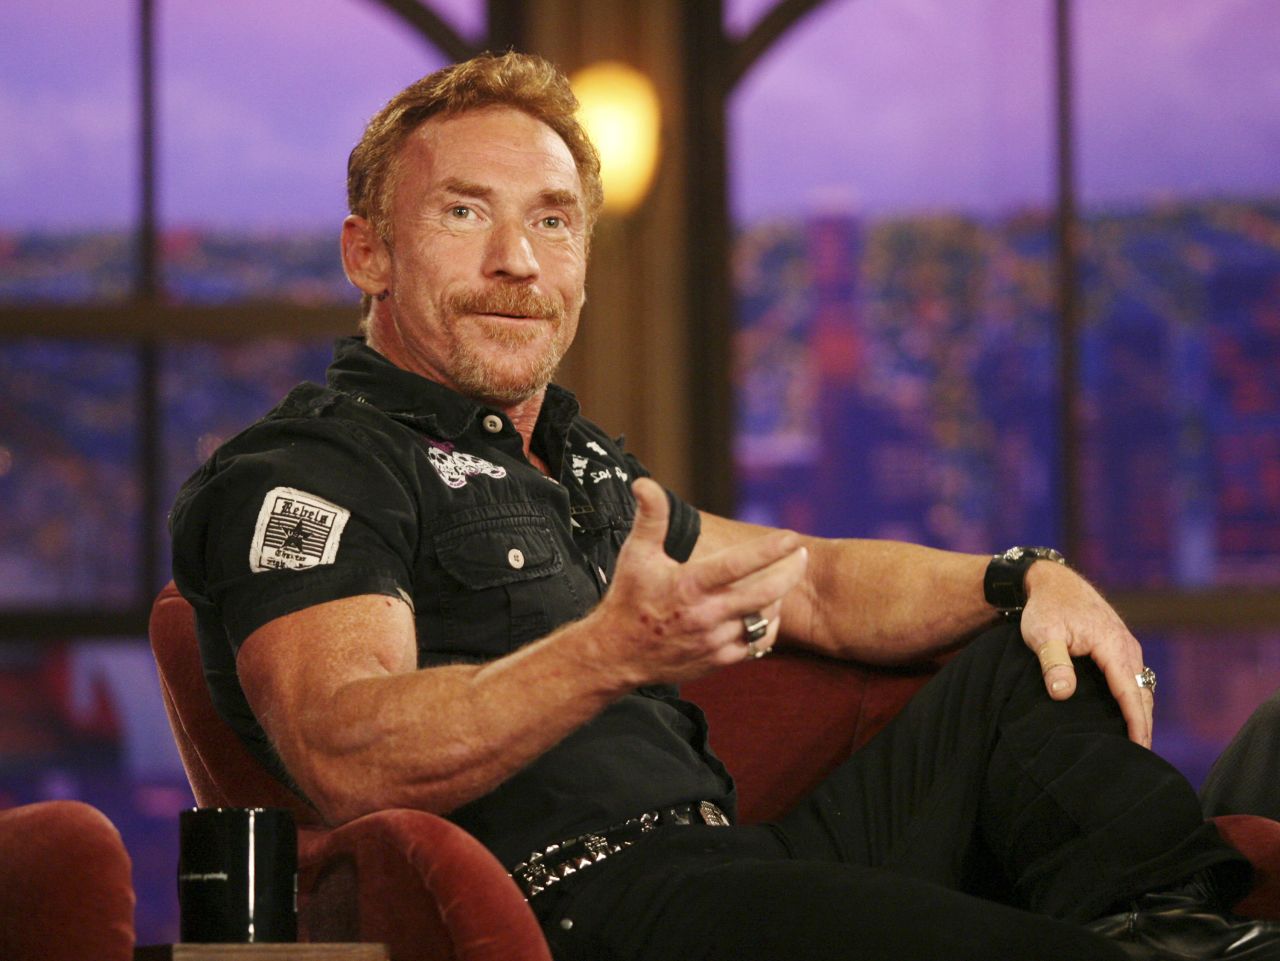 Danny Bonaduce turned 55 on August 13, and the former "Partridge Family" star has maintained his heartthrob status.